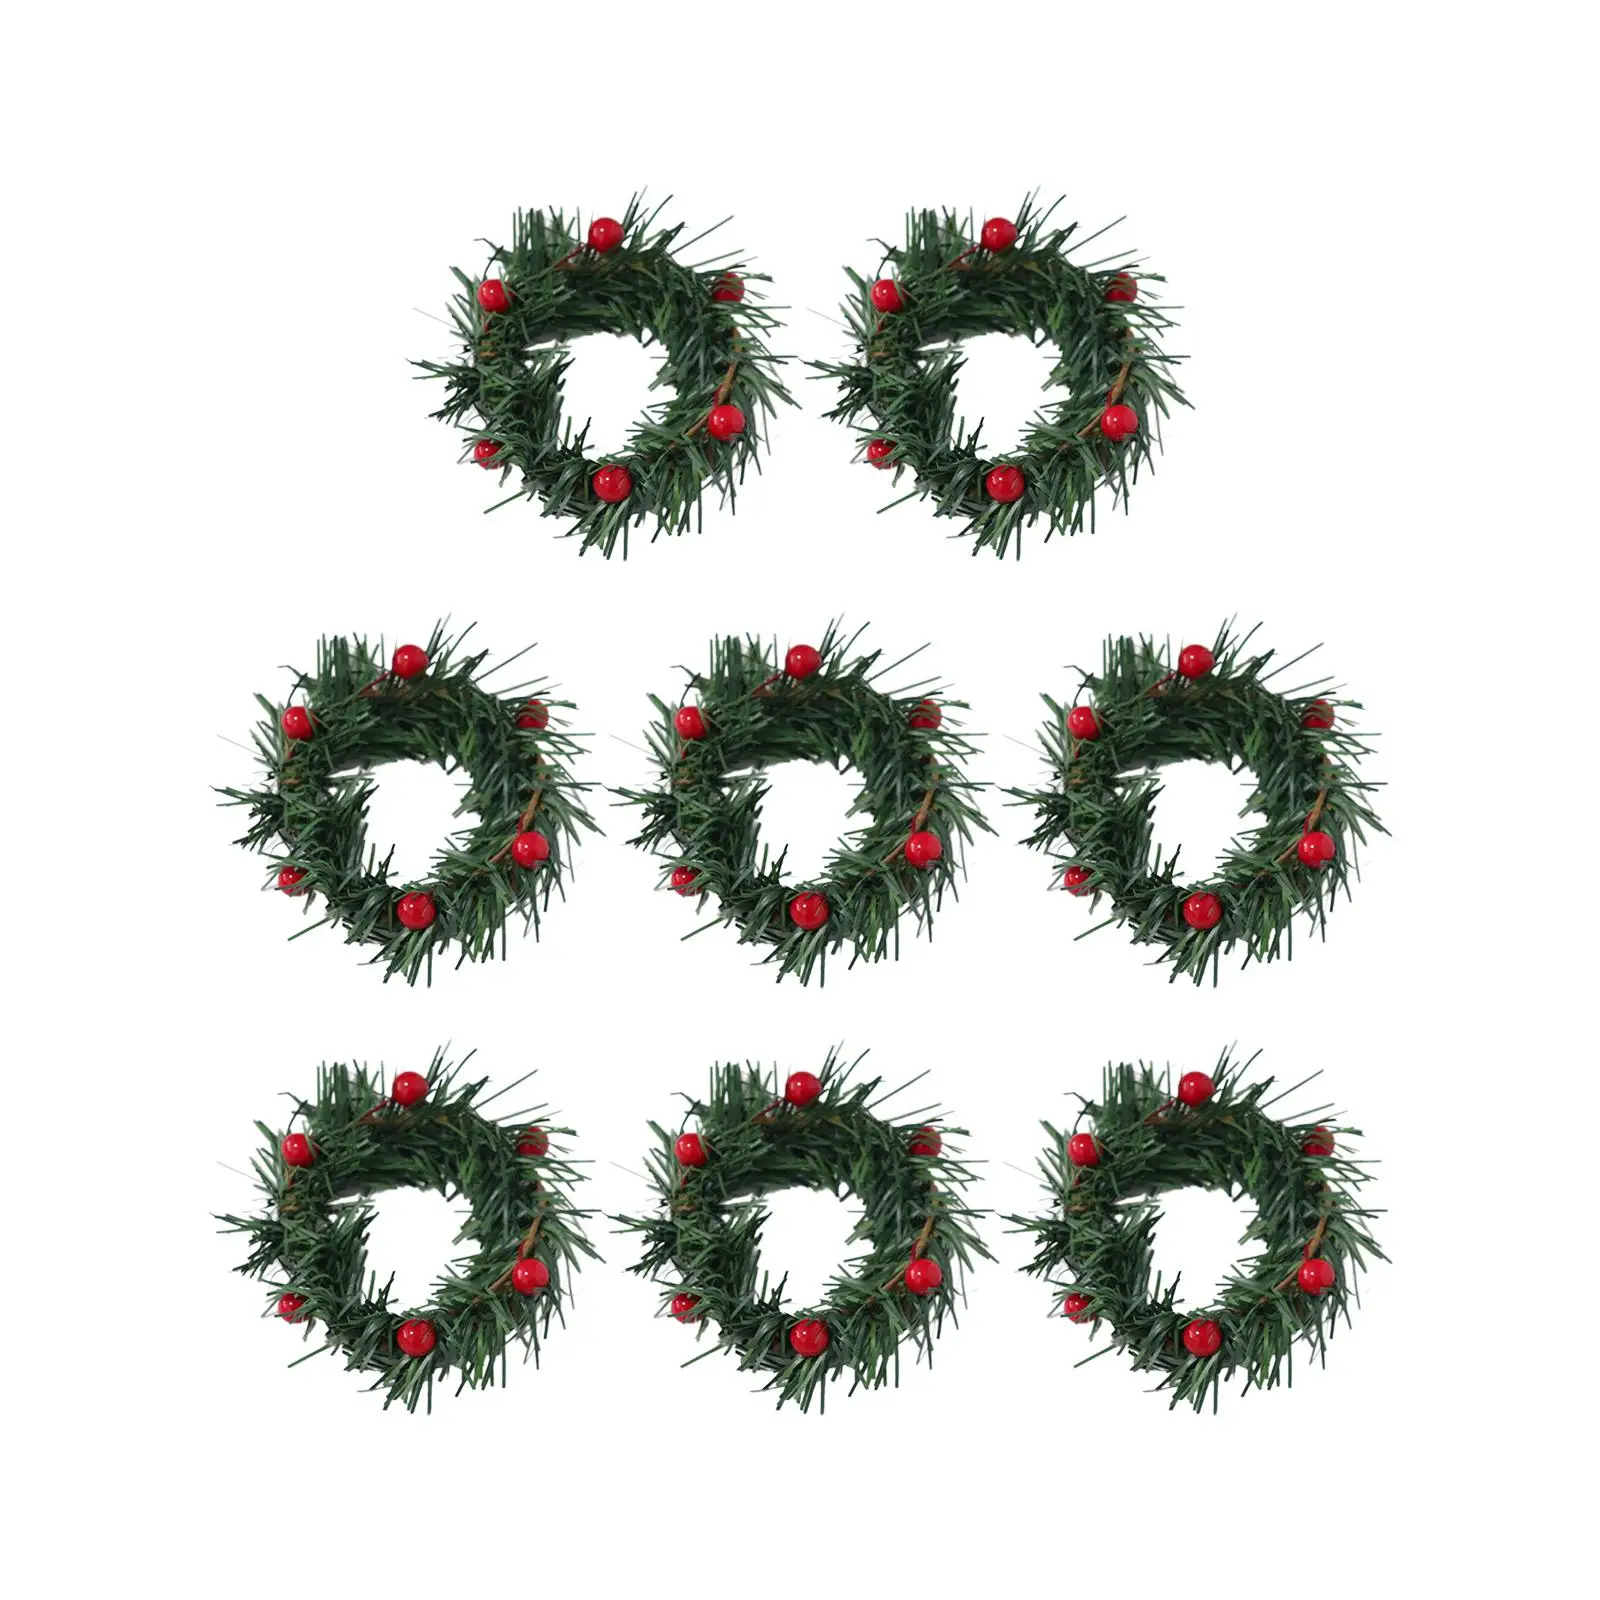 8Pcs Candle Ring Wreath Floral Arrangement Artificial Garland Greenery Wreath for Home Easter Centerpieces Tabletop Ornament